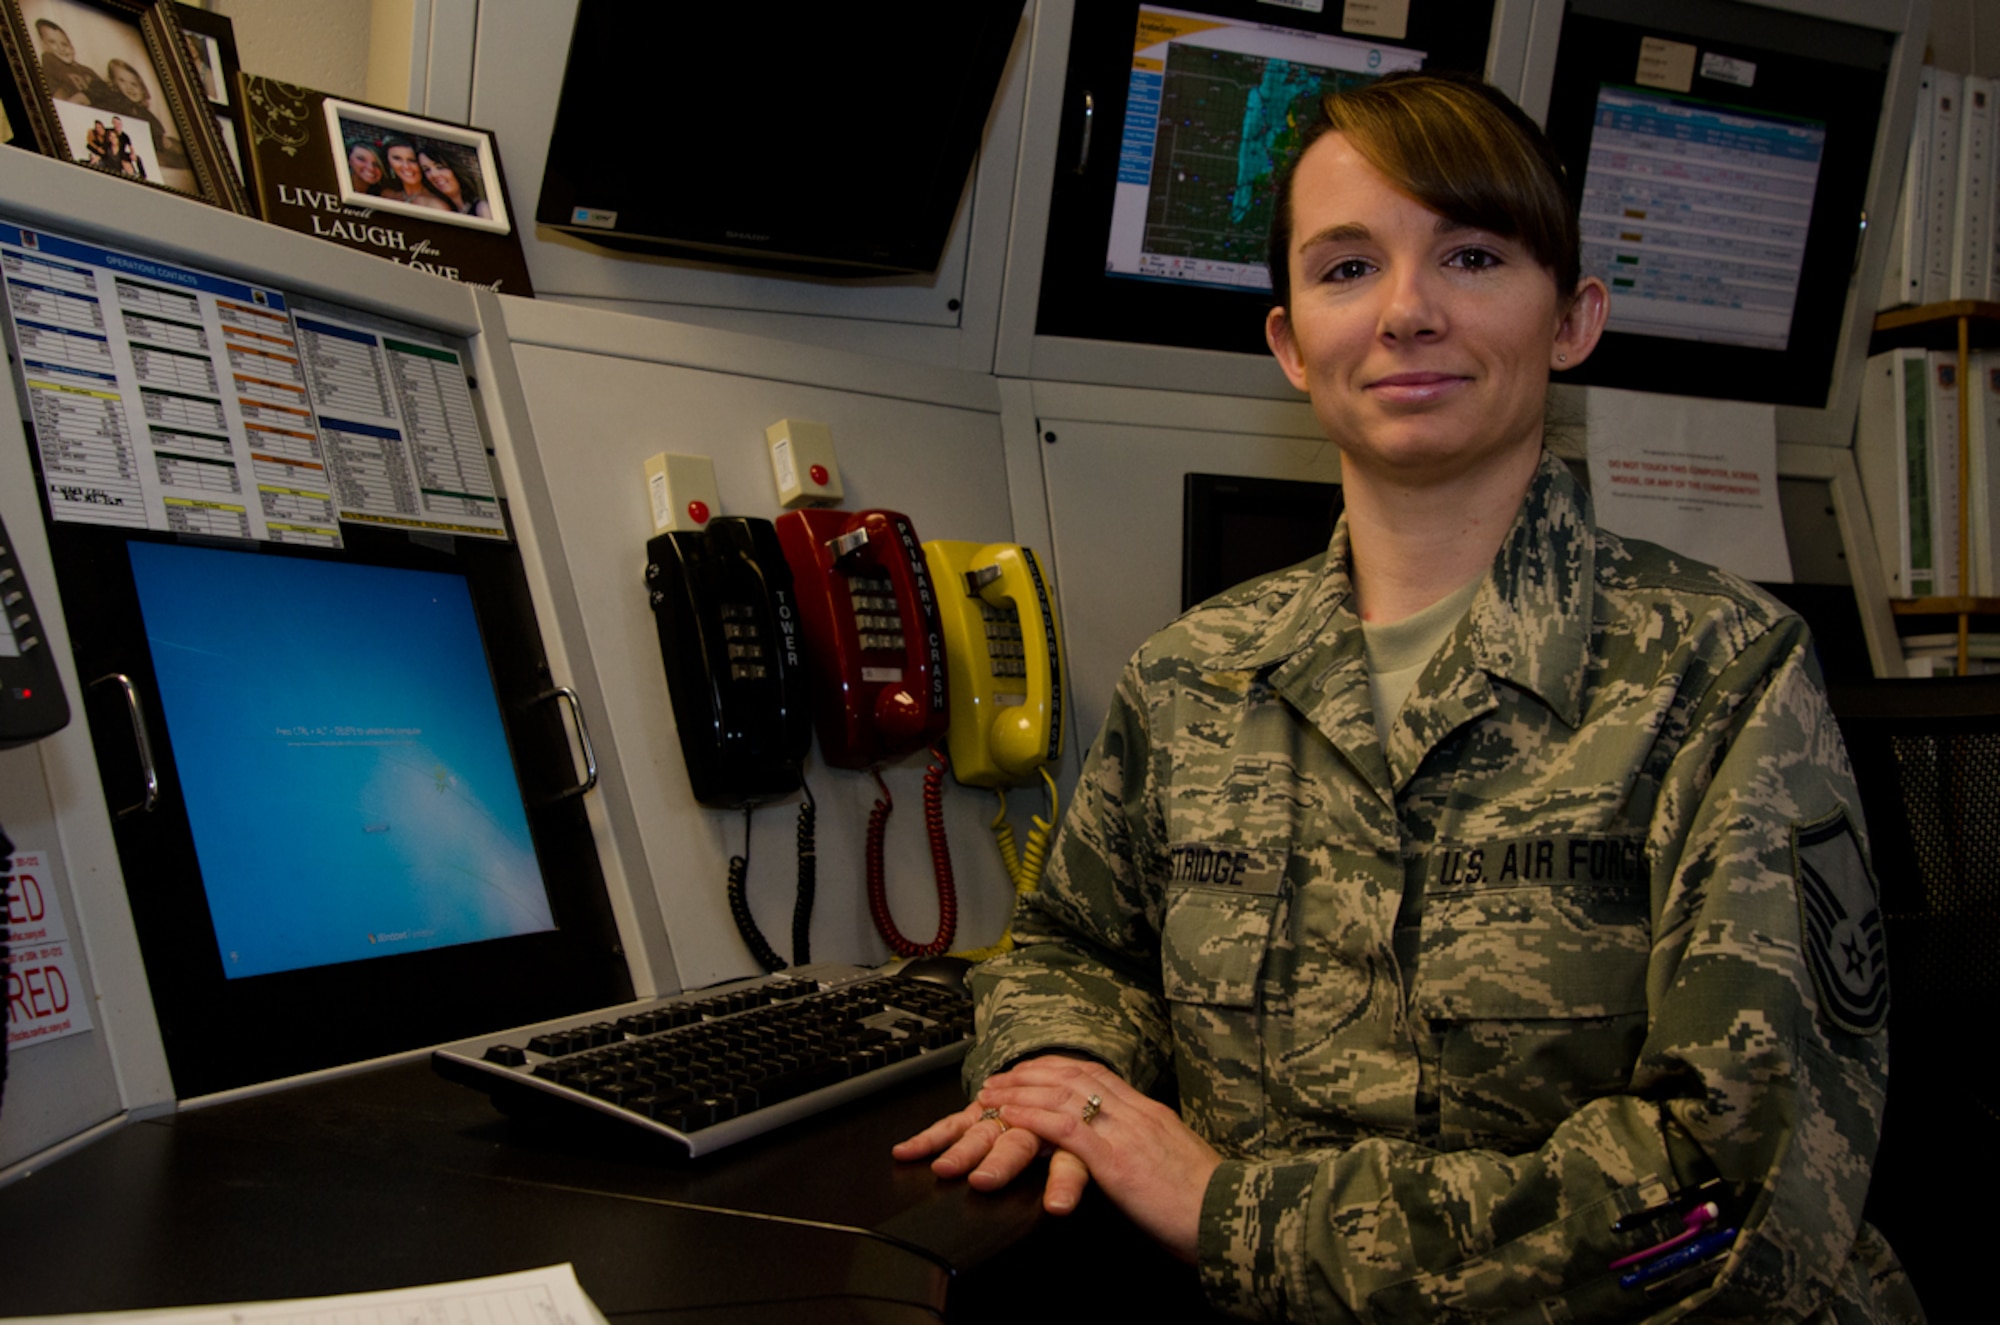 U.S. Air Force Master Sgt. Bernadine Eastridge, 139th Airfield Management Training non-commissioned officer in-charge, Missouri Air National Guard, poses at the airfield operations desk at Rosecrans Air National Guard Base, Mo., Feb. 20, 2014.  Eastridge was selected to receive the Airfield Management Craftsman of the Year award.  (U.S. Air National Guard photo by: Senior Airman Patrick P. Evenson/Released)